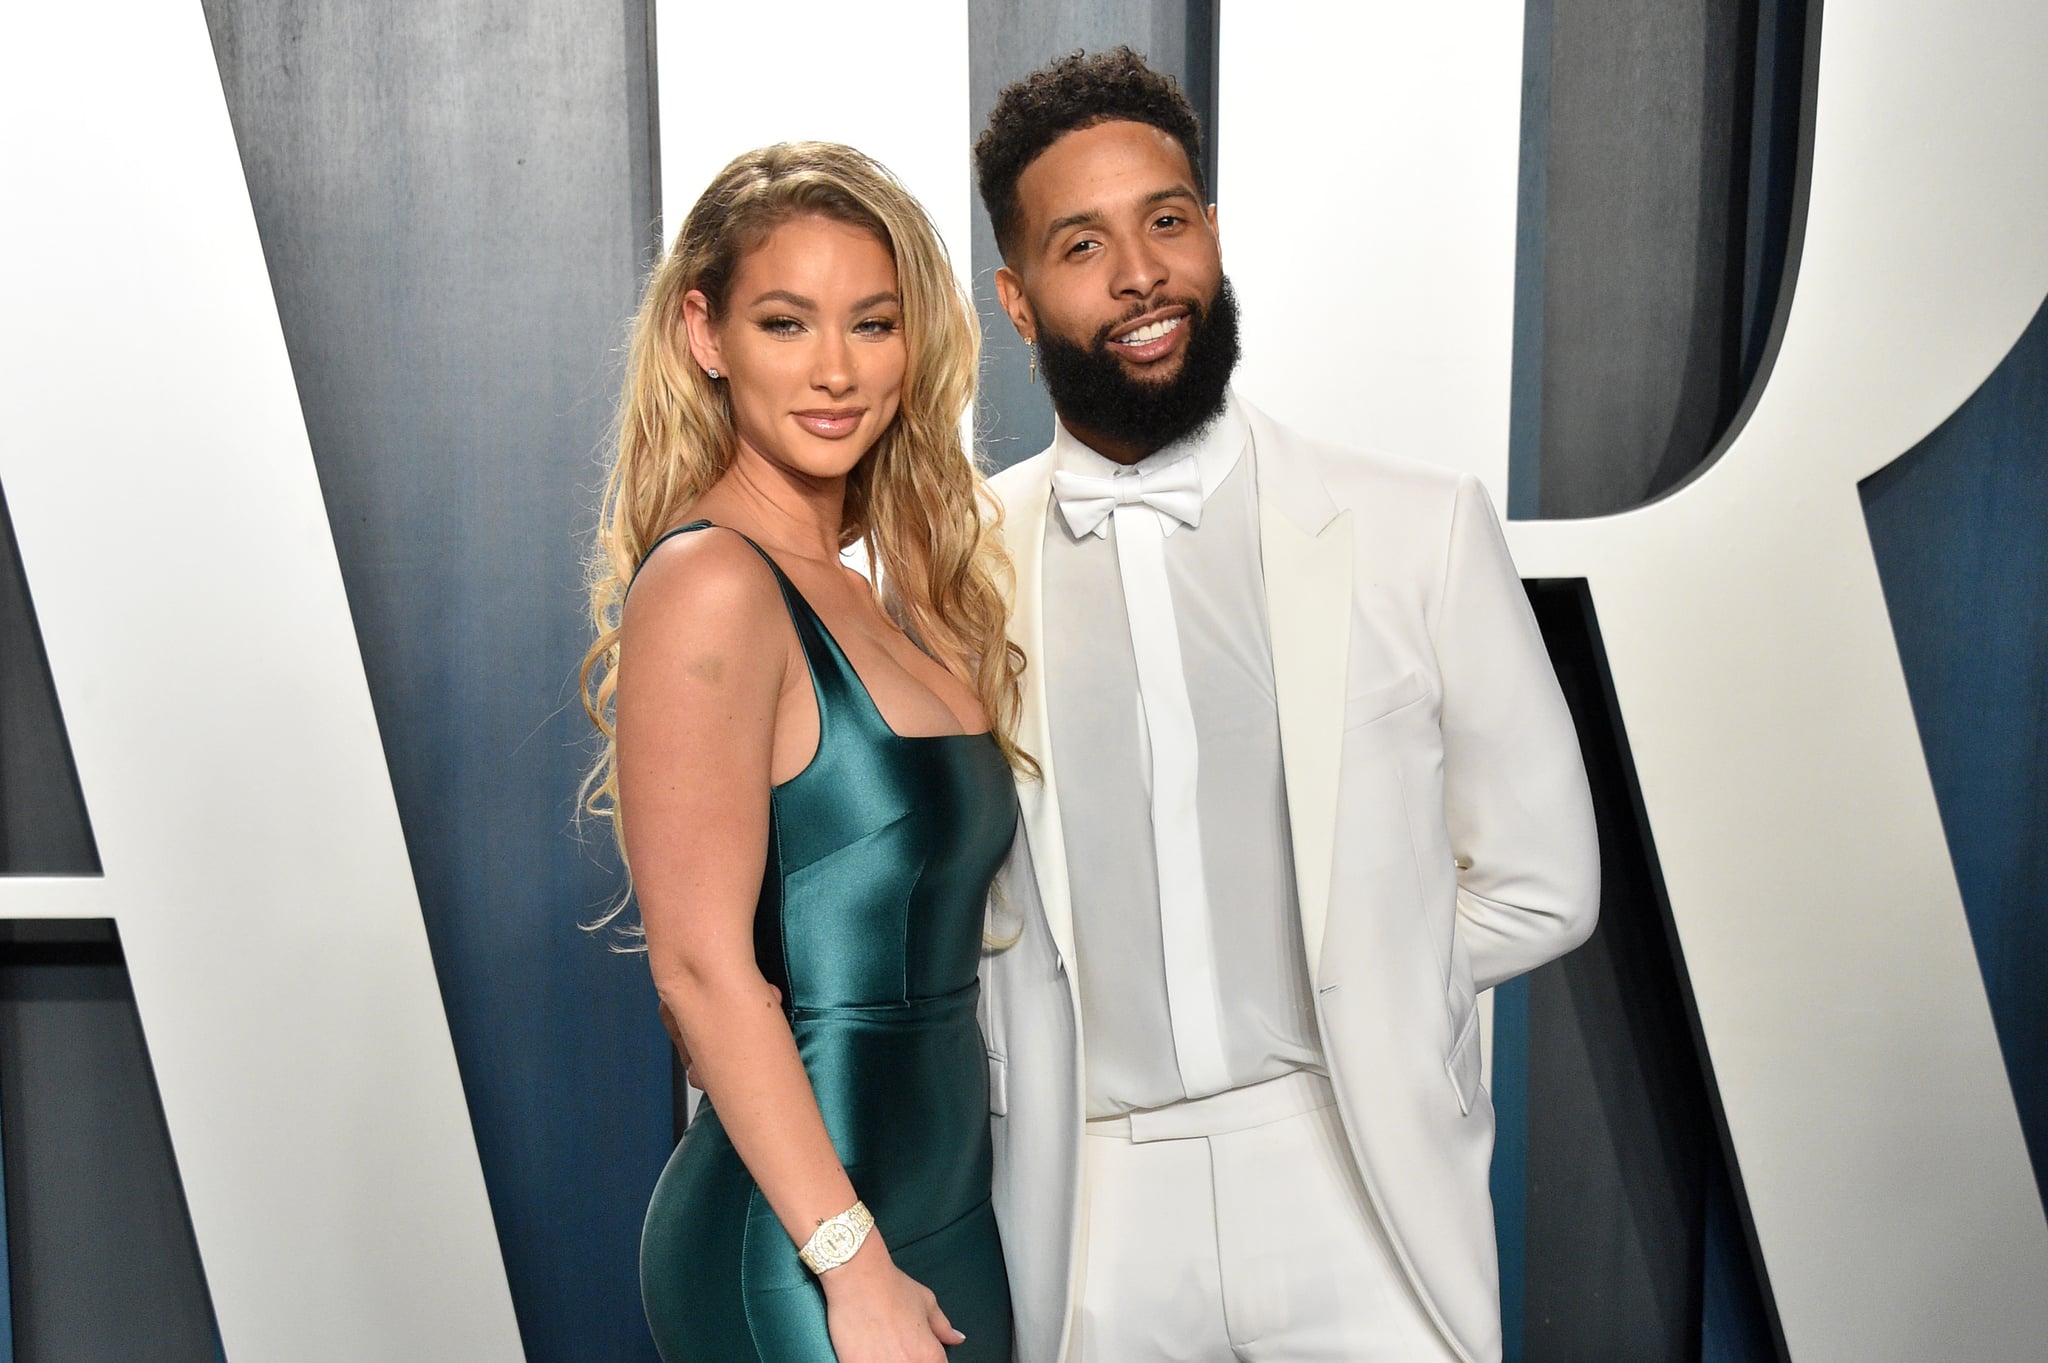 BEVERLY HILLS, CALIFORNIA - FEBRUARY 09: Lauren Wood and Odell Beckham Jr. attend the 2020 Vanity Fair Oscar Party hosted by Radhika Jones at Wallis Annenberg Centre for the Performing Arts on February 09, 2020 in Beverly Hills, California. (Photo by Gregg DeGuire/FilmMagic)